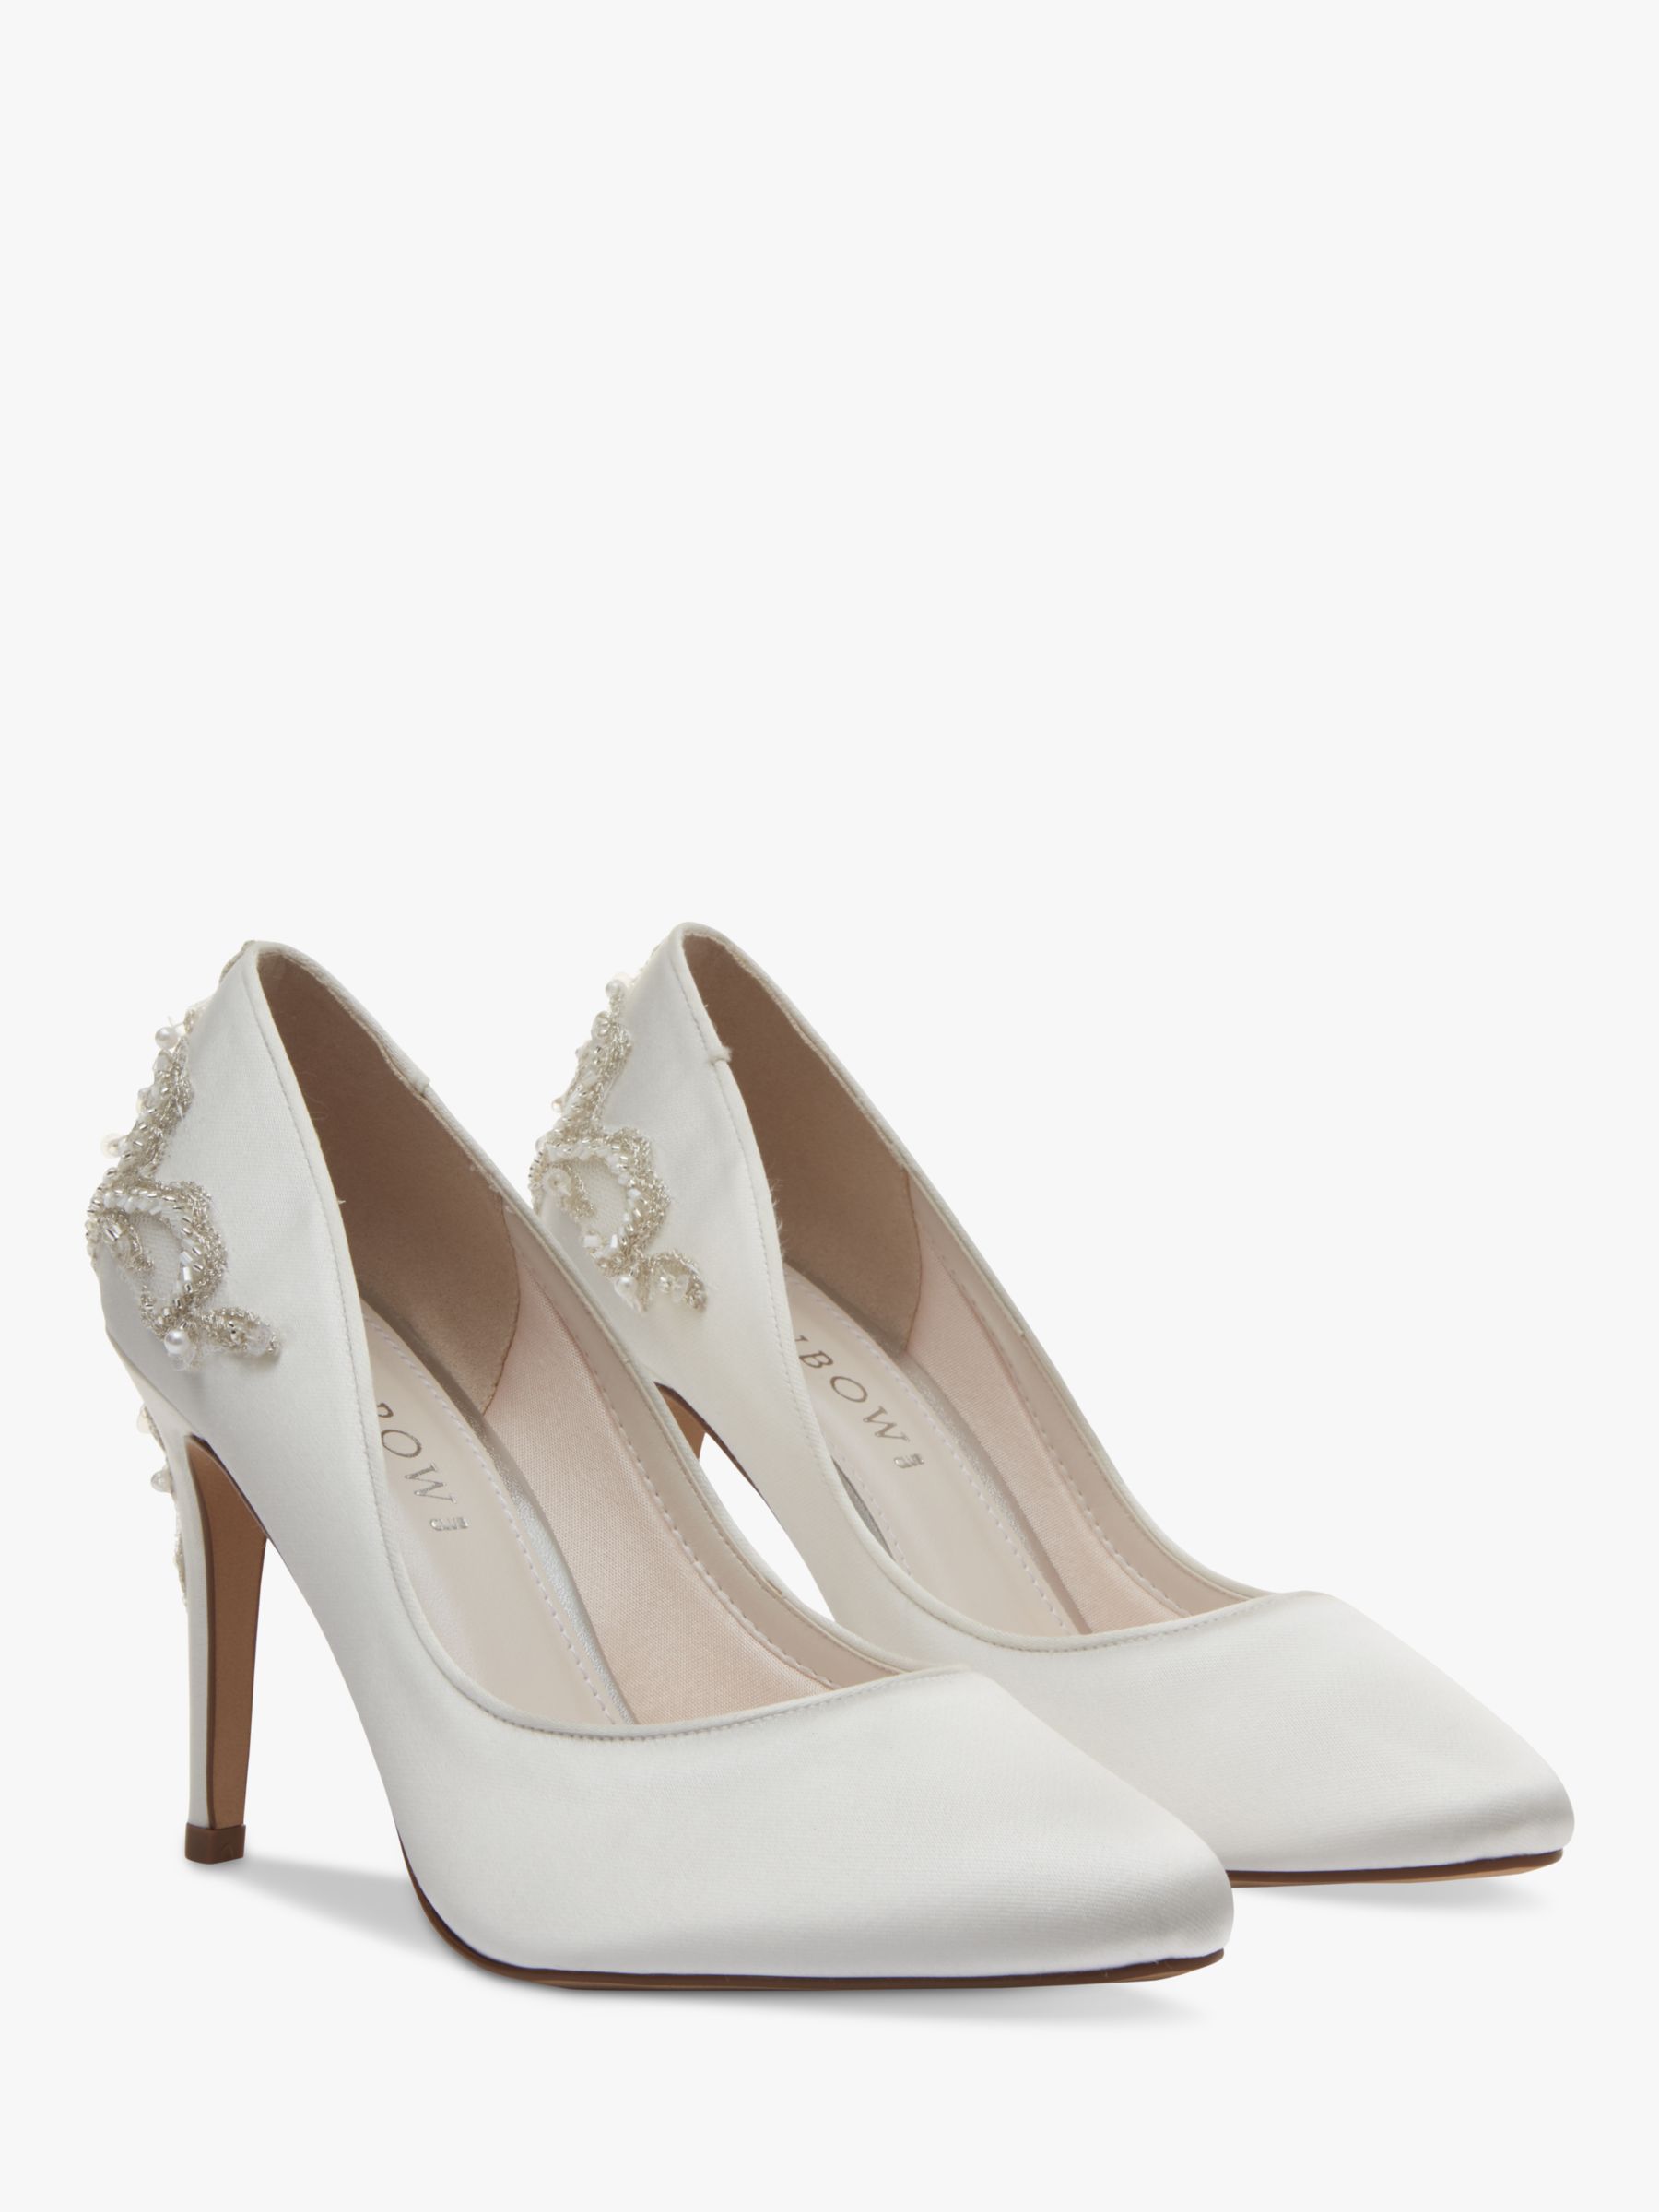 Rainbow Club Willow Embellished Court Shoes, Ivory Satin, 3.5